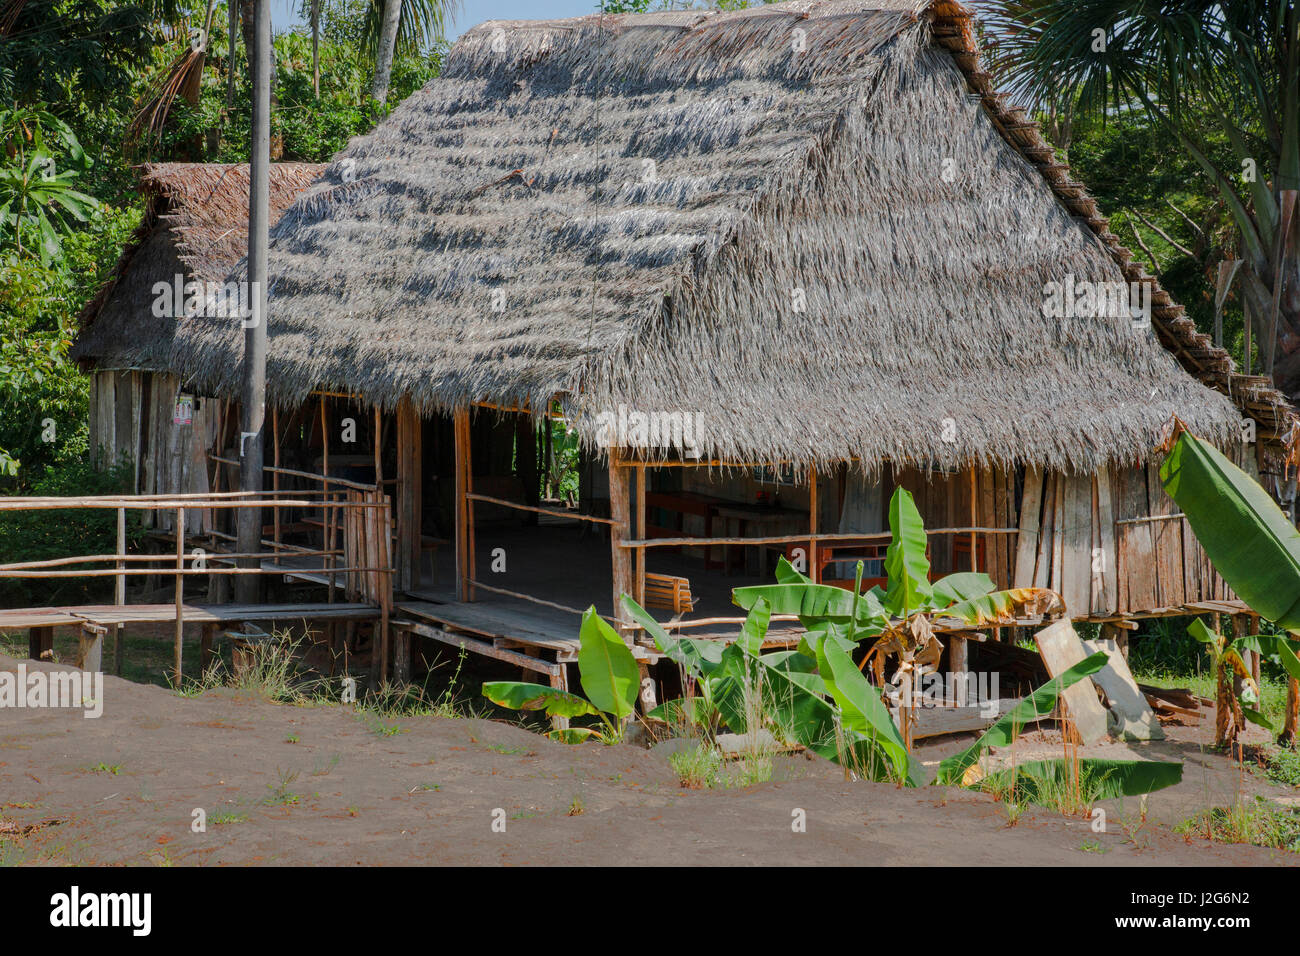 This is a typical home of thatched roof made of palm leaves in the Peruvian town of Amazonas. Stock Photo